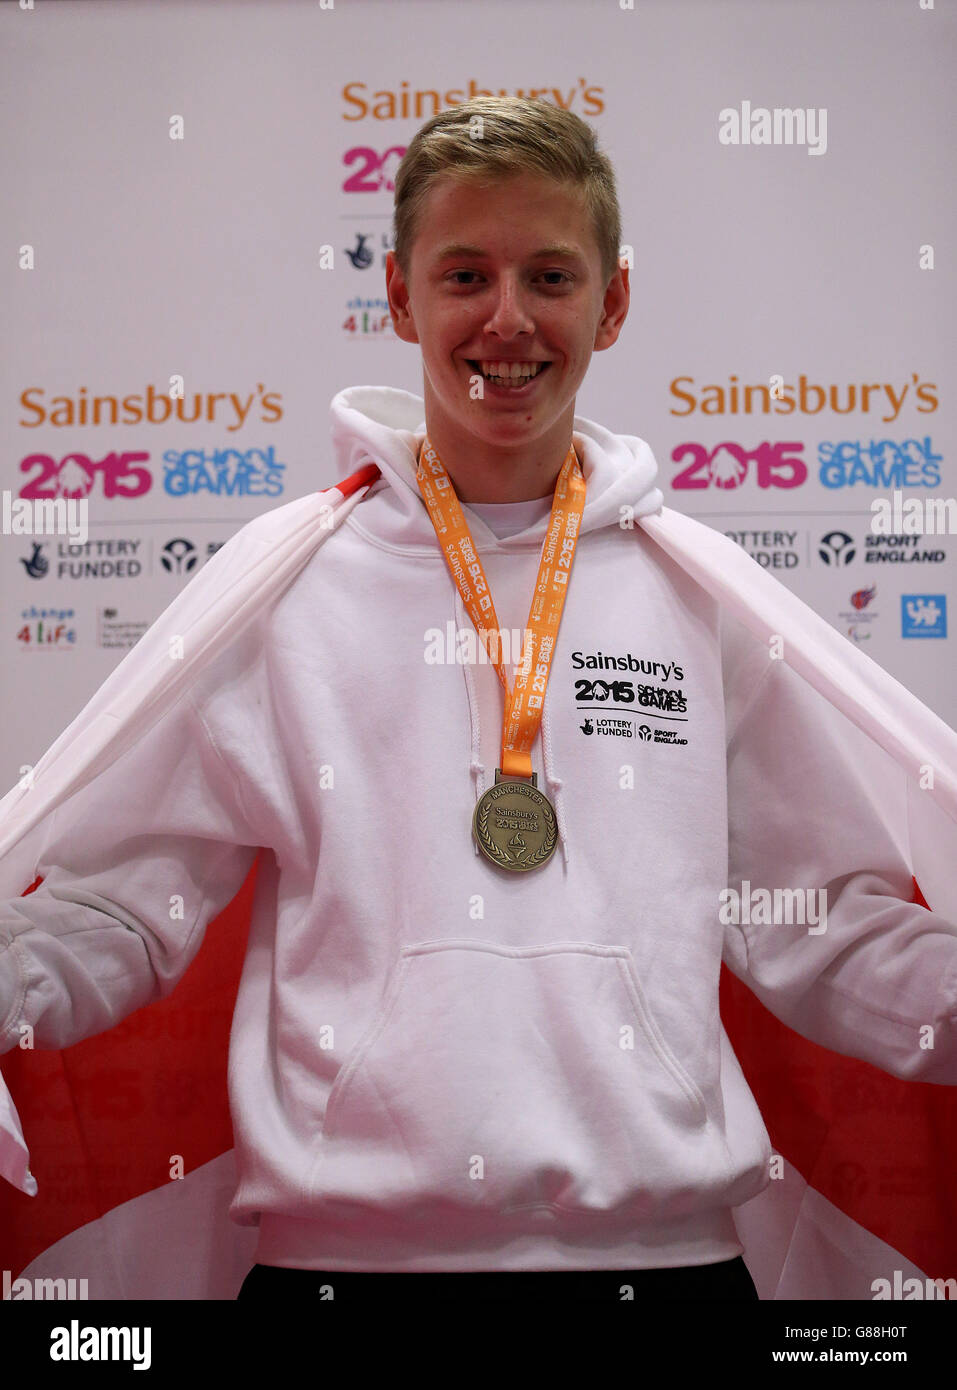 England's Jamie Craze with his gold medal after winning the Men's Sabre Final at the fencing during the Sainsbury's 2015 School Games in Manchester. PRESS ASSOCIATION Photo. Picture date: Saturday September 5, 2015. Photo credit should read: Steven Paston/PA Wire Stock Photo